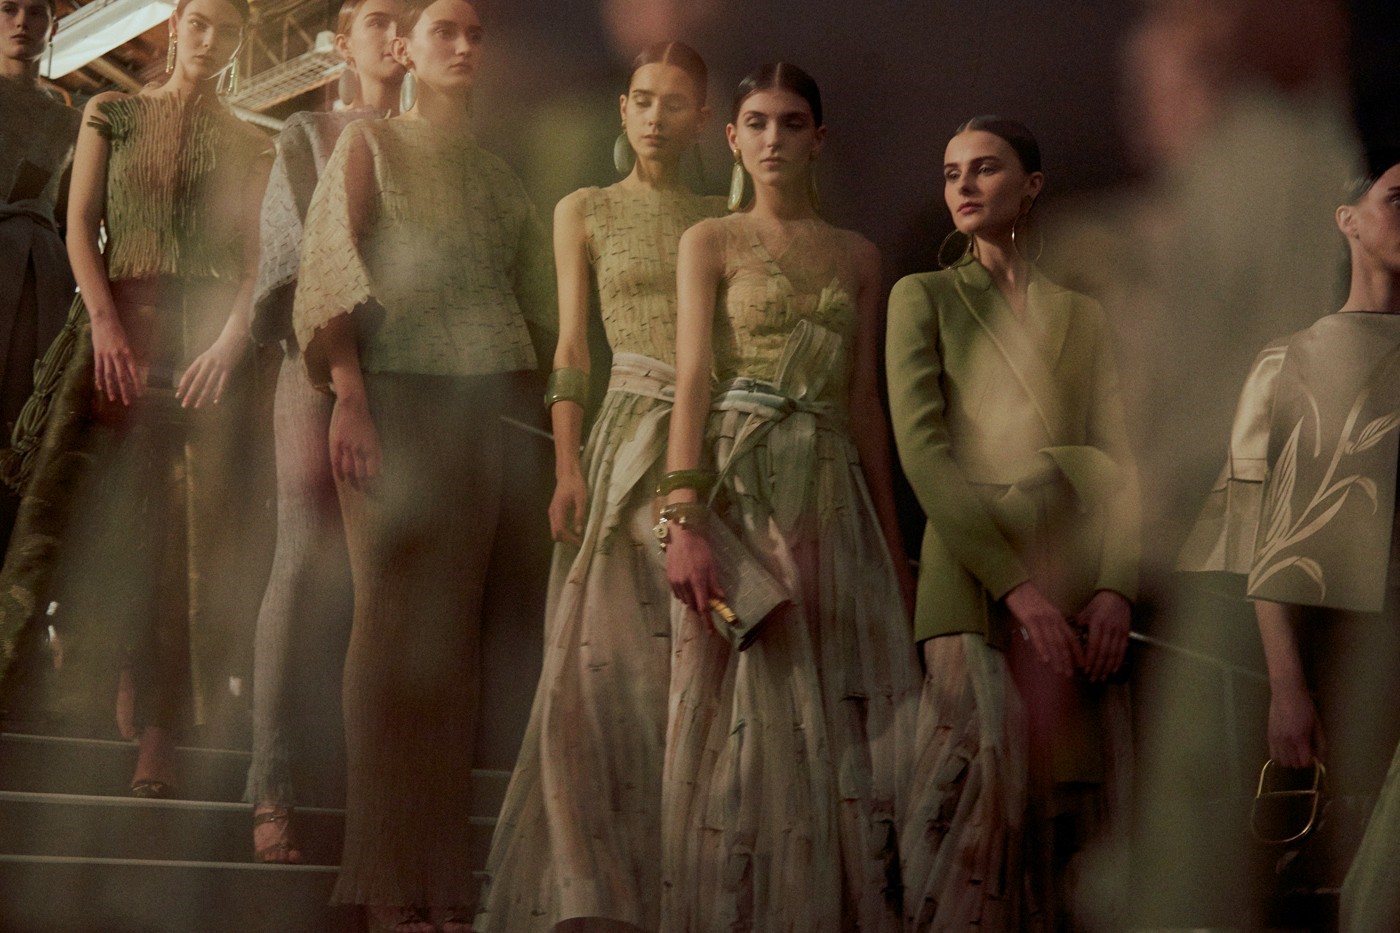 BACKSTAGE AT DIOR HAUTE COUTURE SPRING-SUMMER 2015 PARIS